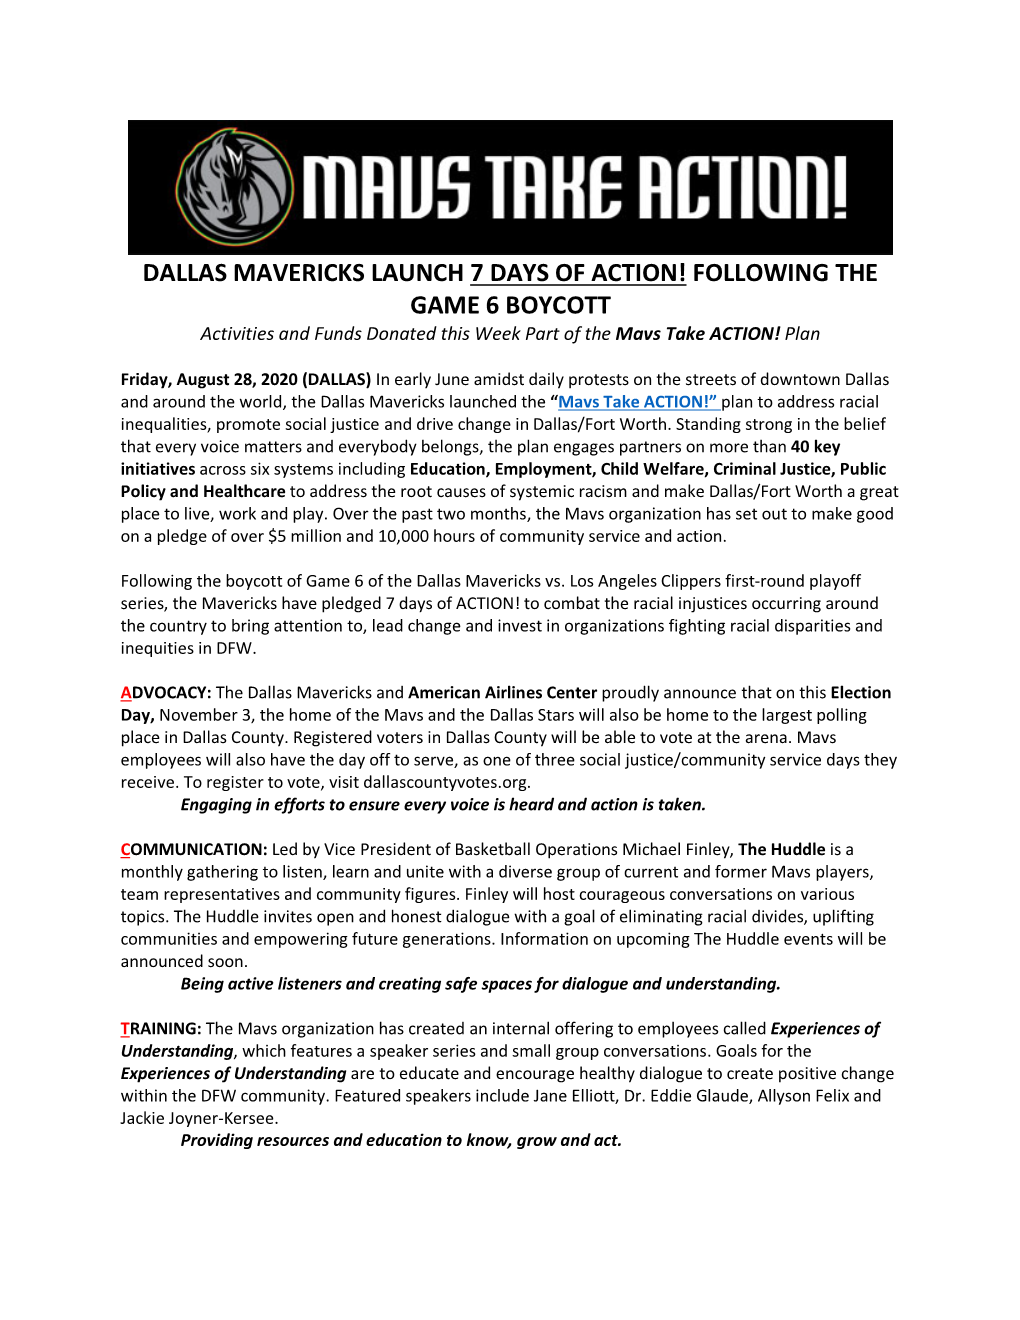 DALLAS MAVERICKS LAUNCH 7 DAYS of ACTION! FOLLOWING the GAME 6 BOYCOTT Activities and Funds Donated This Week Part of the Mavs Take ACTION! Plan